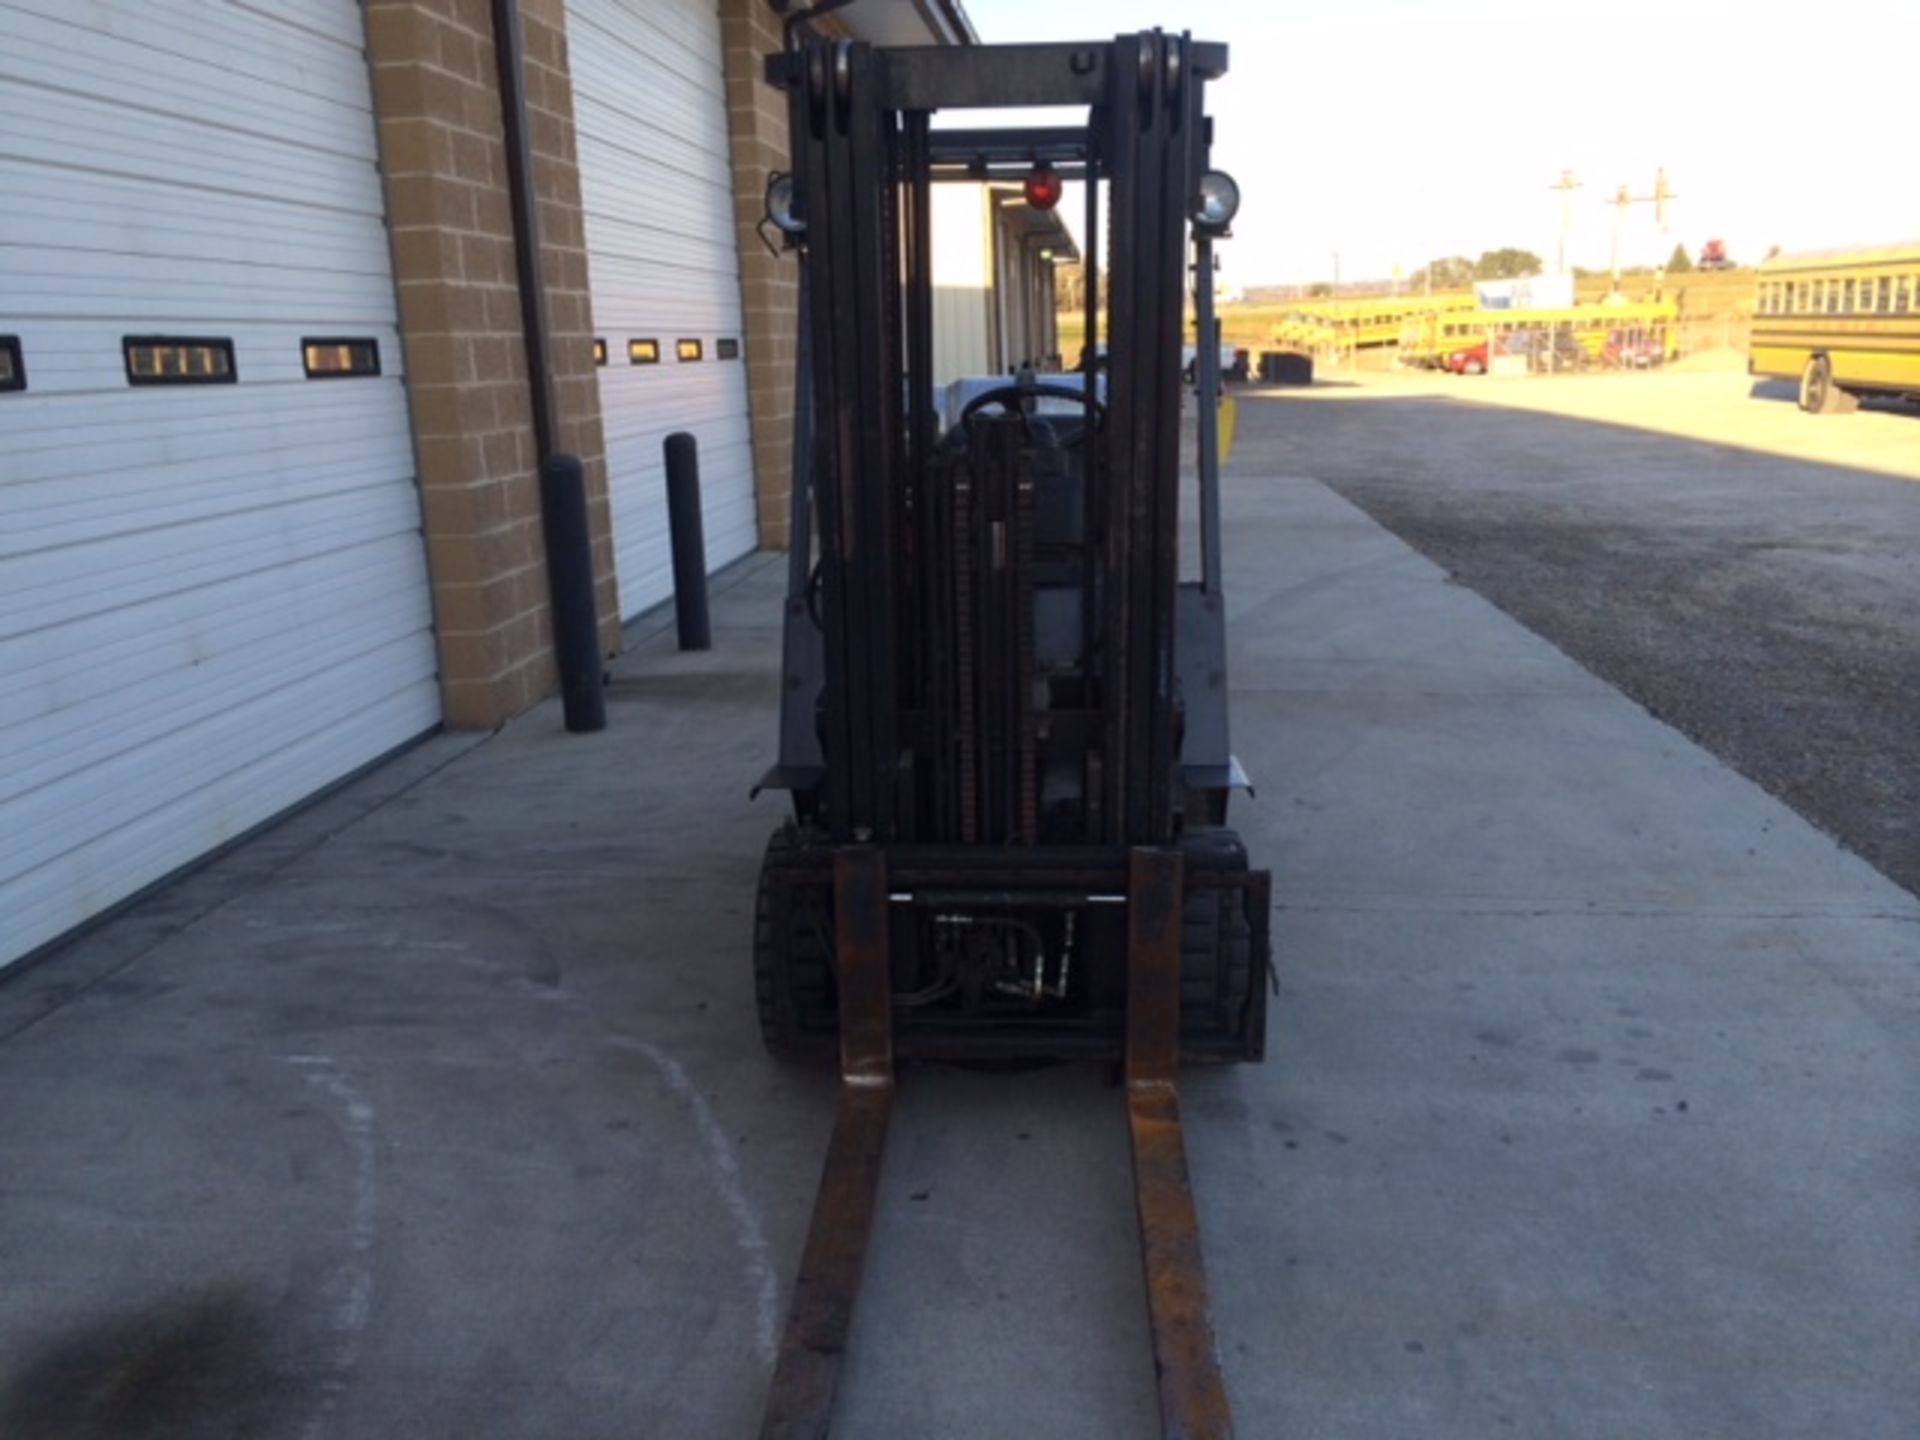 TOYOTA 5,000-lb. Capacity Forklift, Model 6FGU25, LPG, Lever Shift, Solid Tires, 3-Stage Mast, 181'' - Image 2 of 5